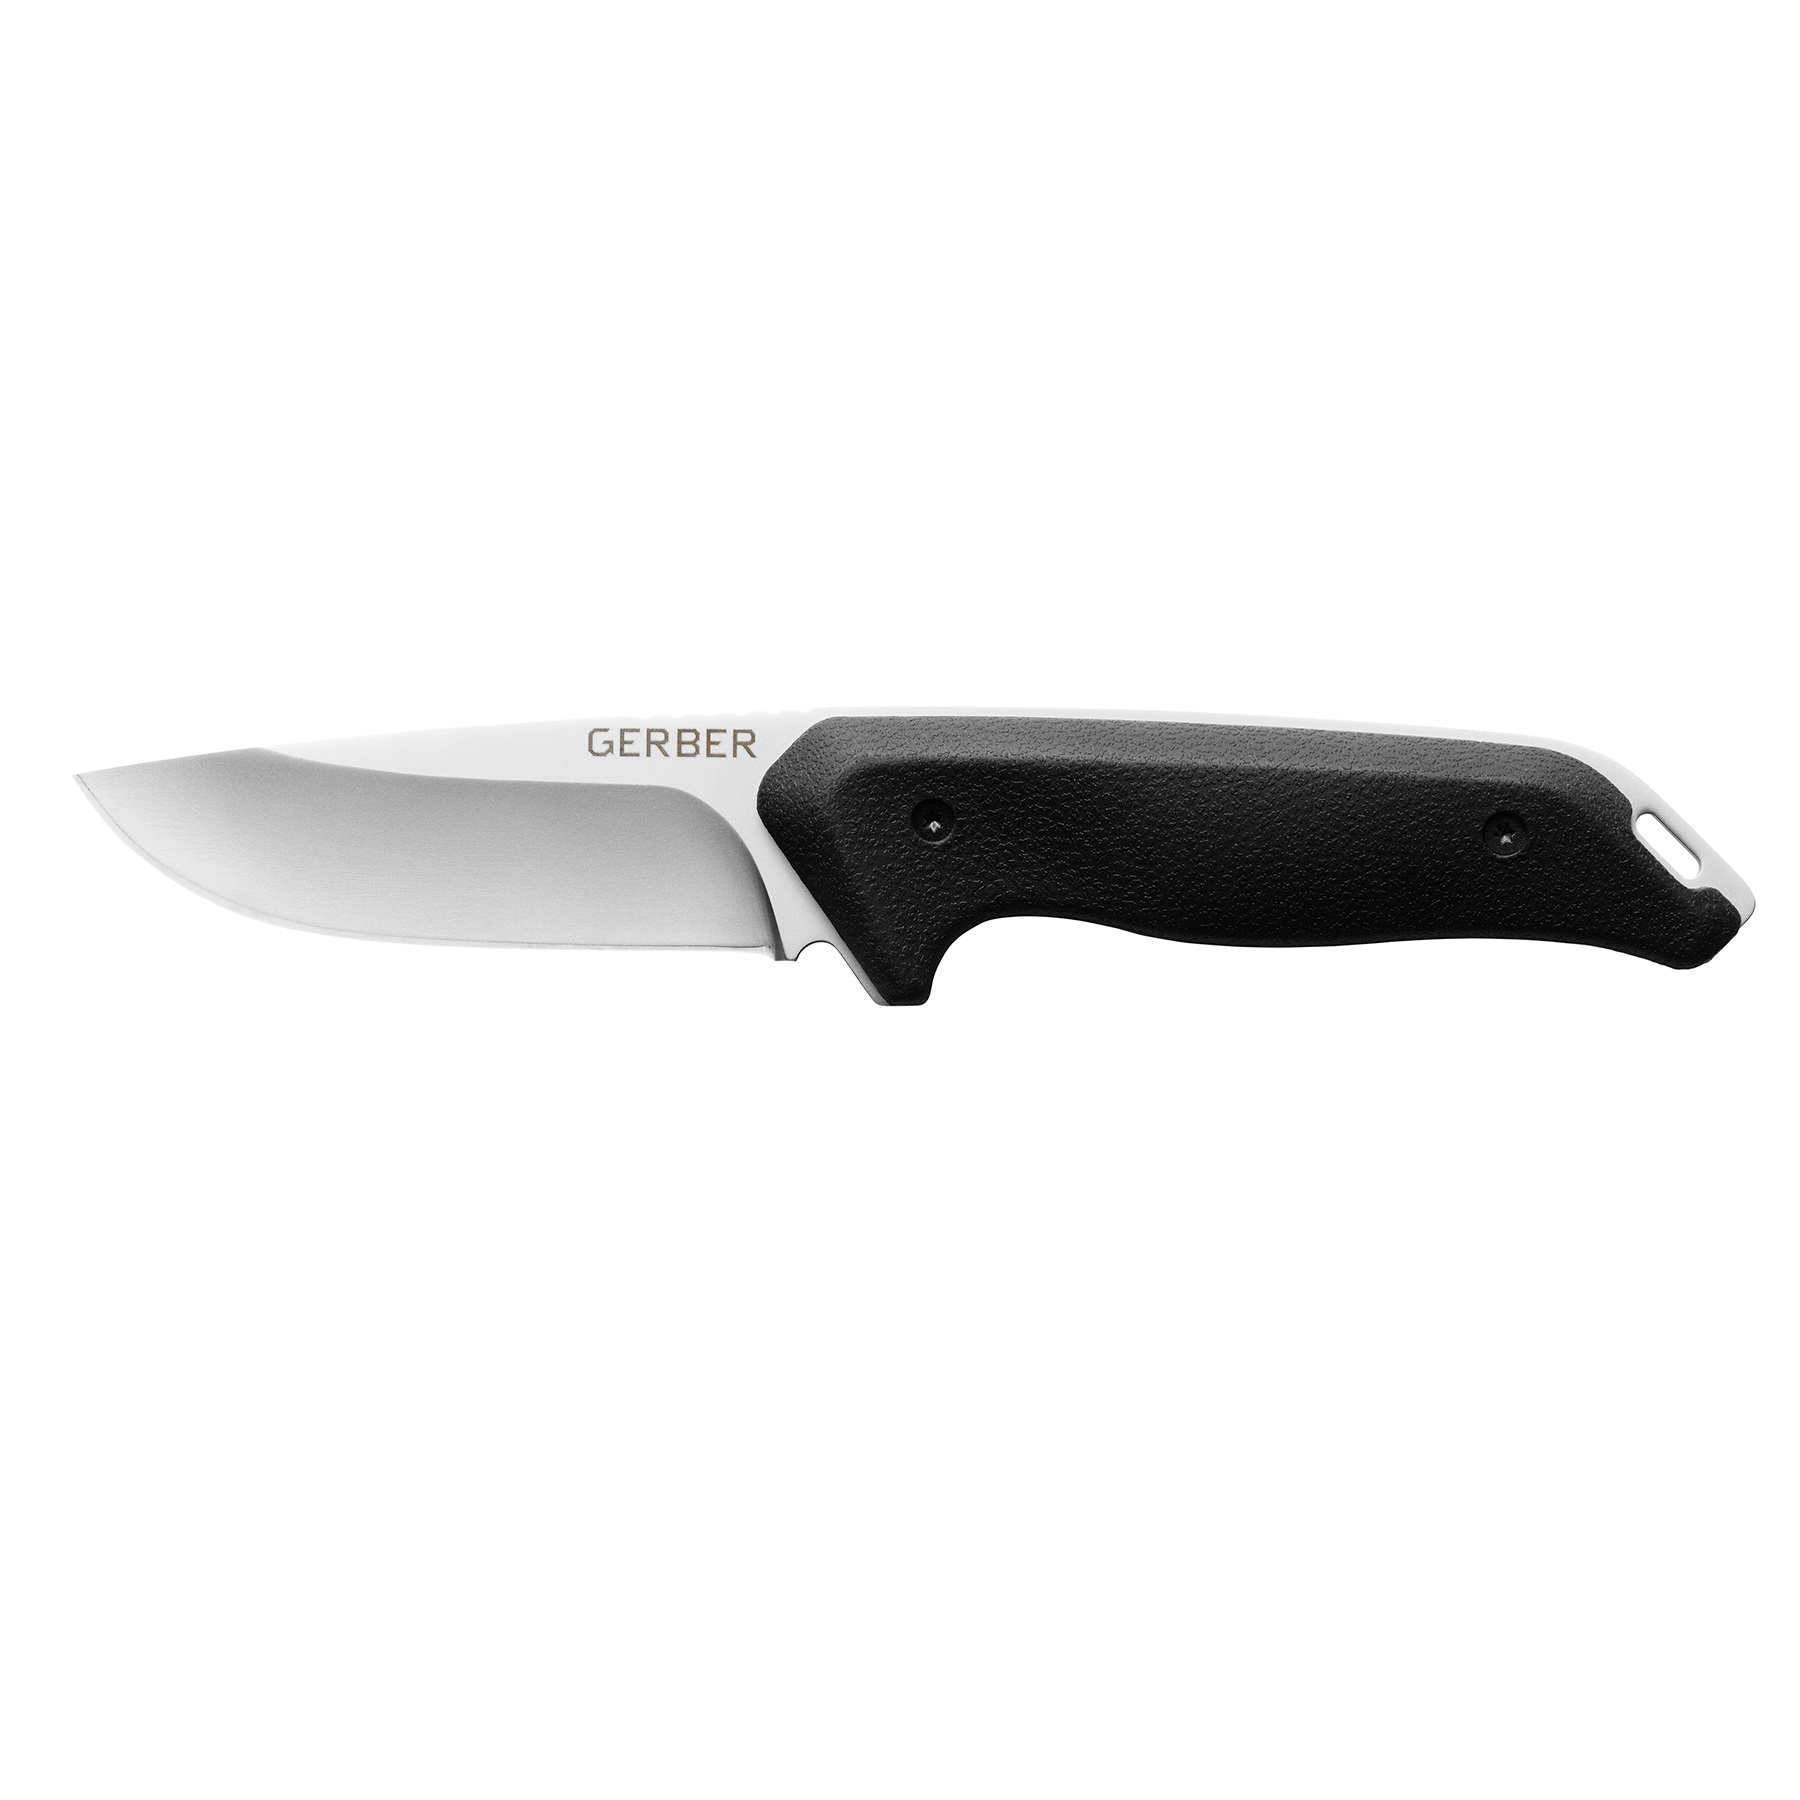 Gerber Moment Large Fixed Blade Black